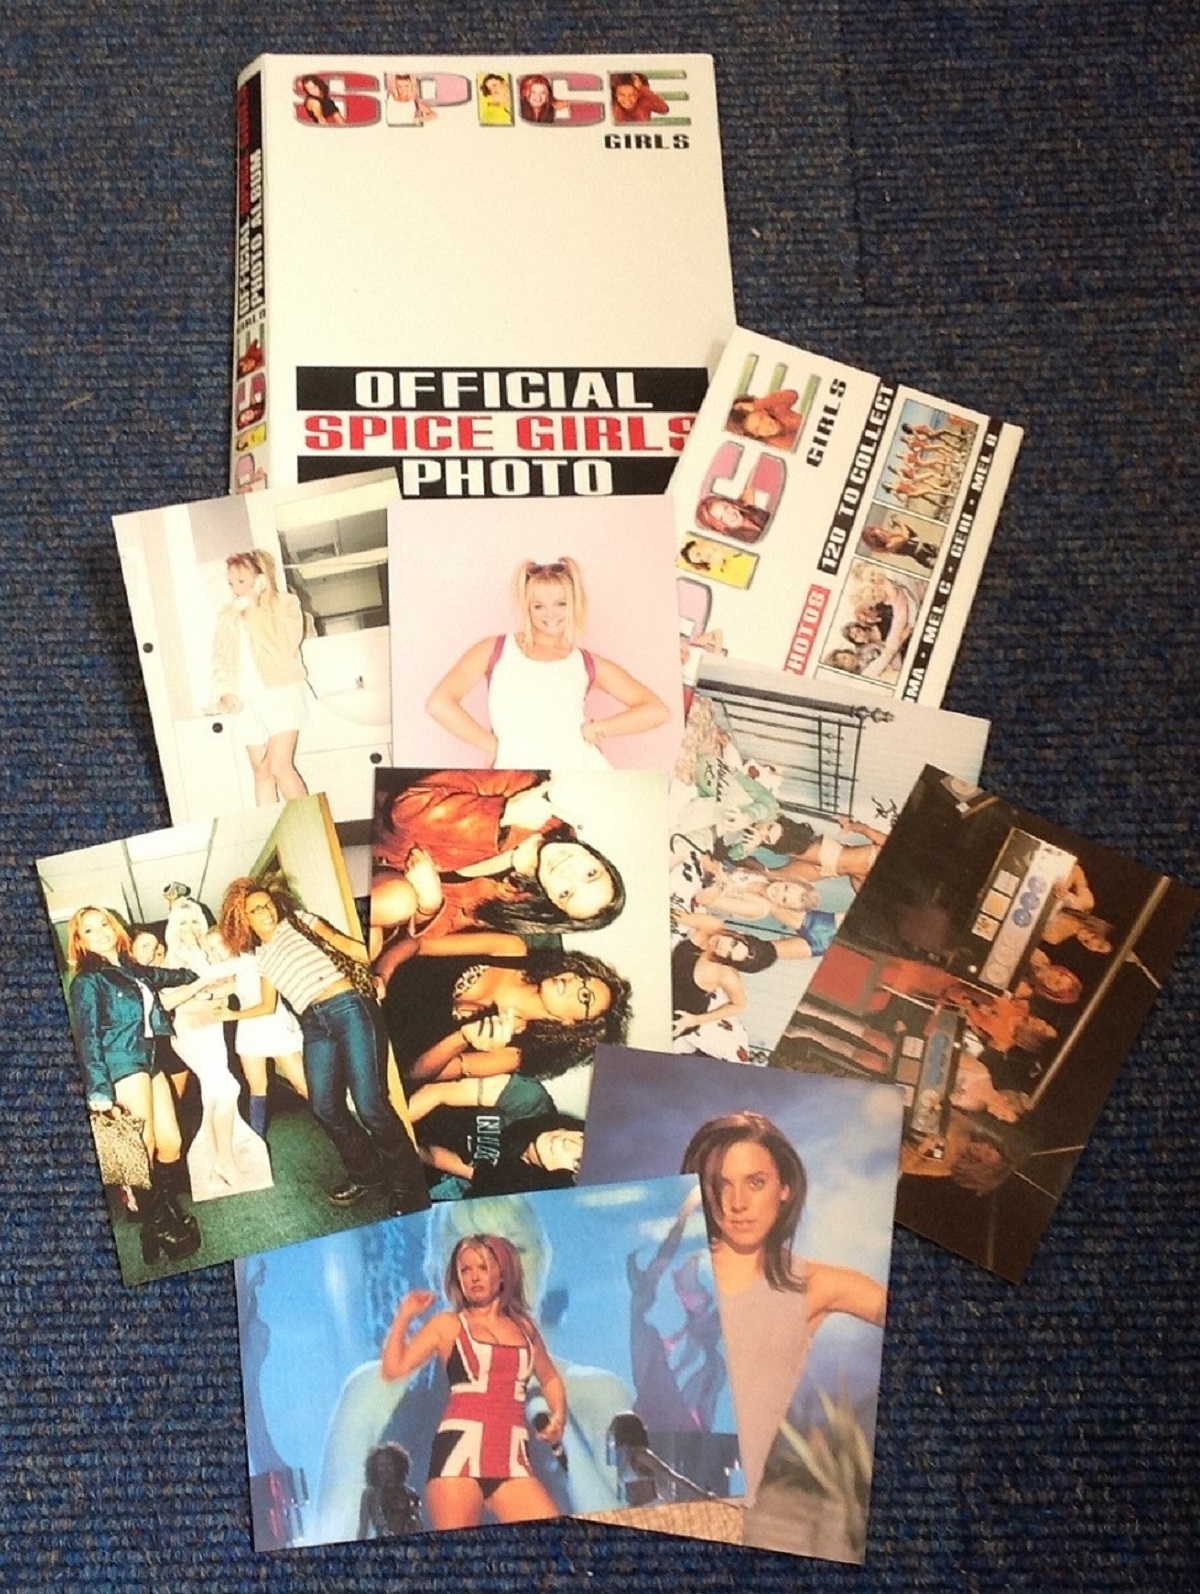 Spice Girls official photo album and cards. UNSIGNED. Good Condition. All autographs come with a